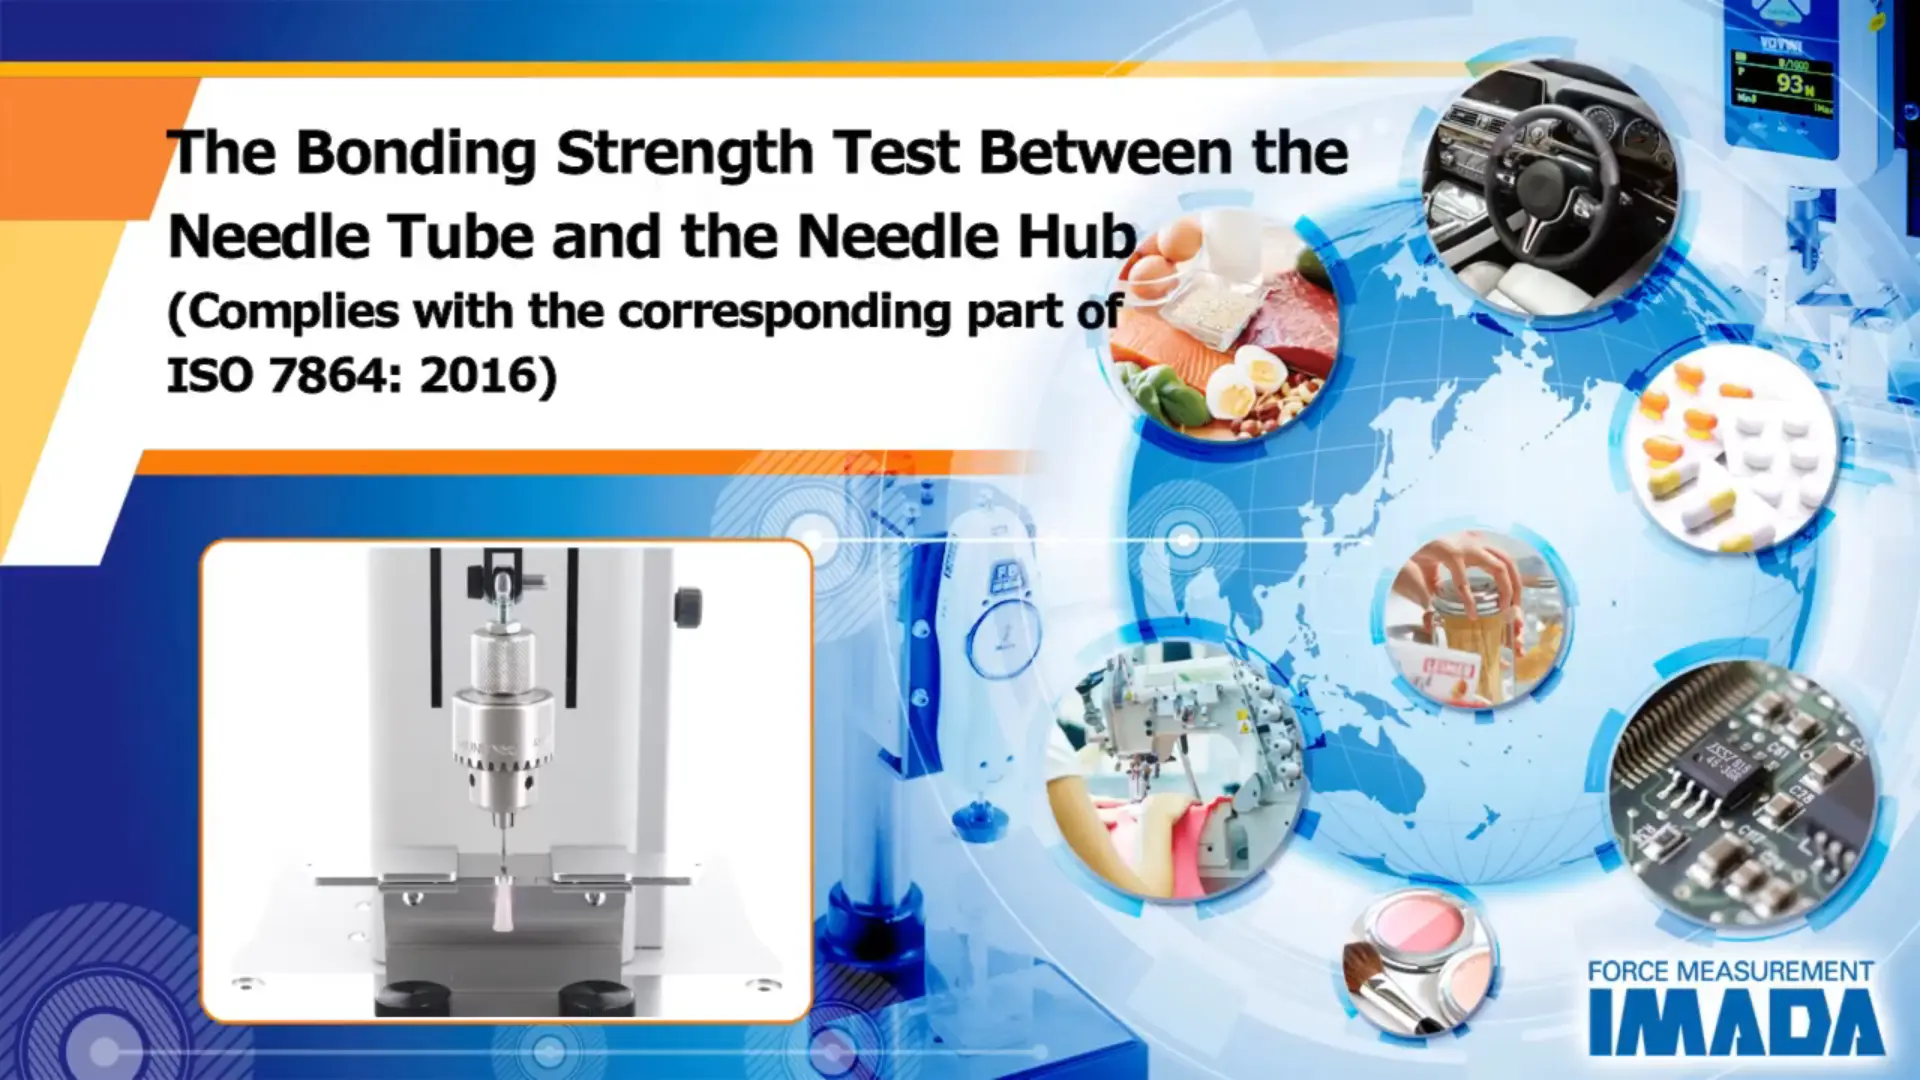 The bonding strength test between the needle tube and the needle hub（Complies with the corresponding part of ISO 7864: 2016）